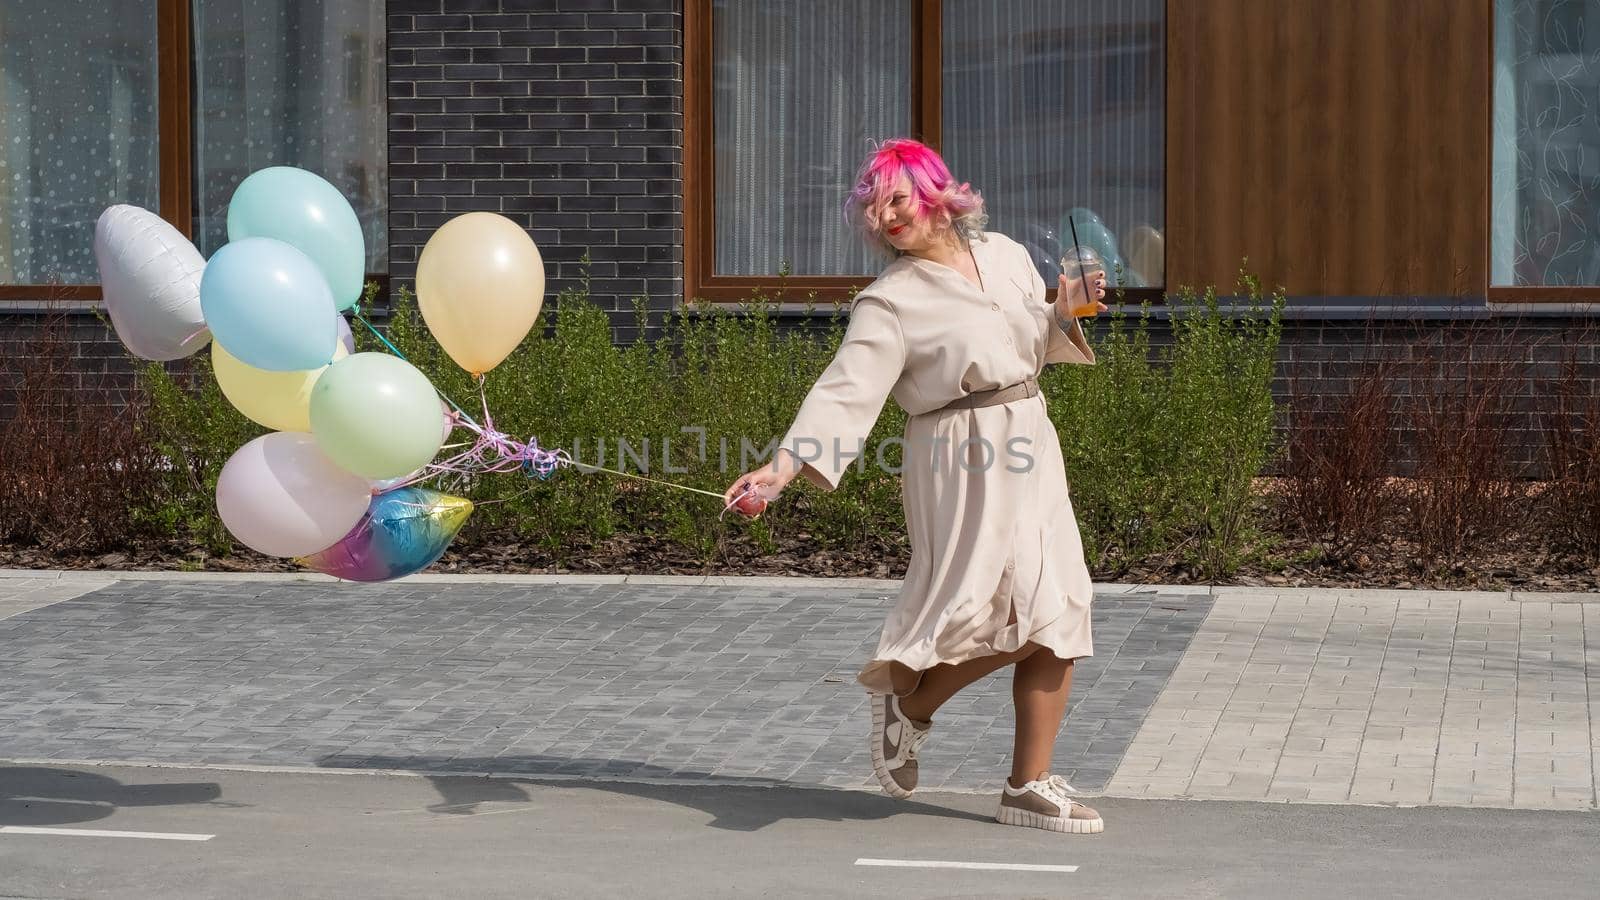 Woman in colored hair walks with an armful of balloons and drinks a refreshing beverage.